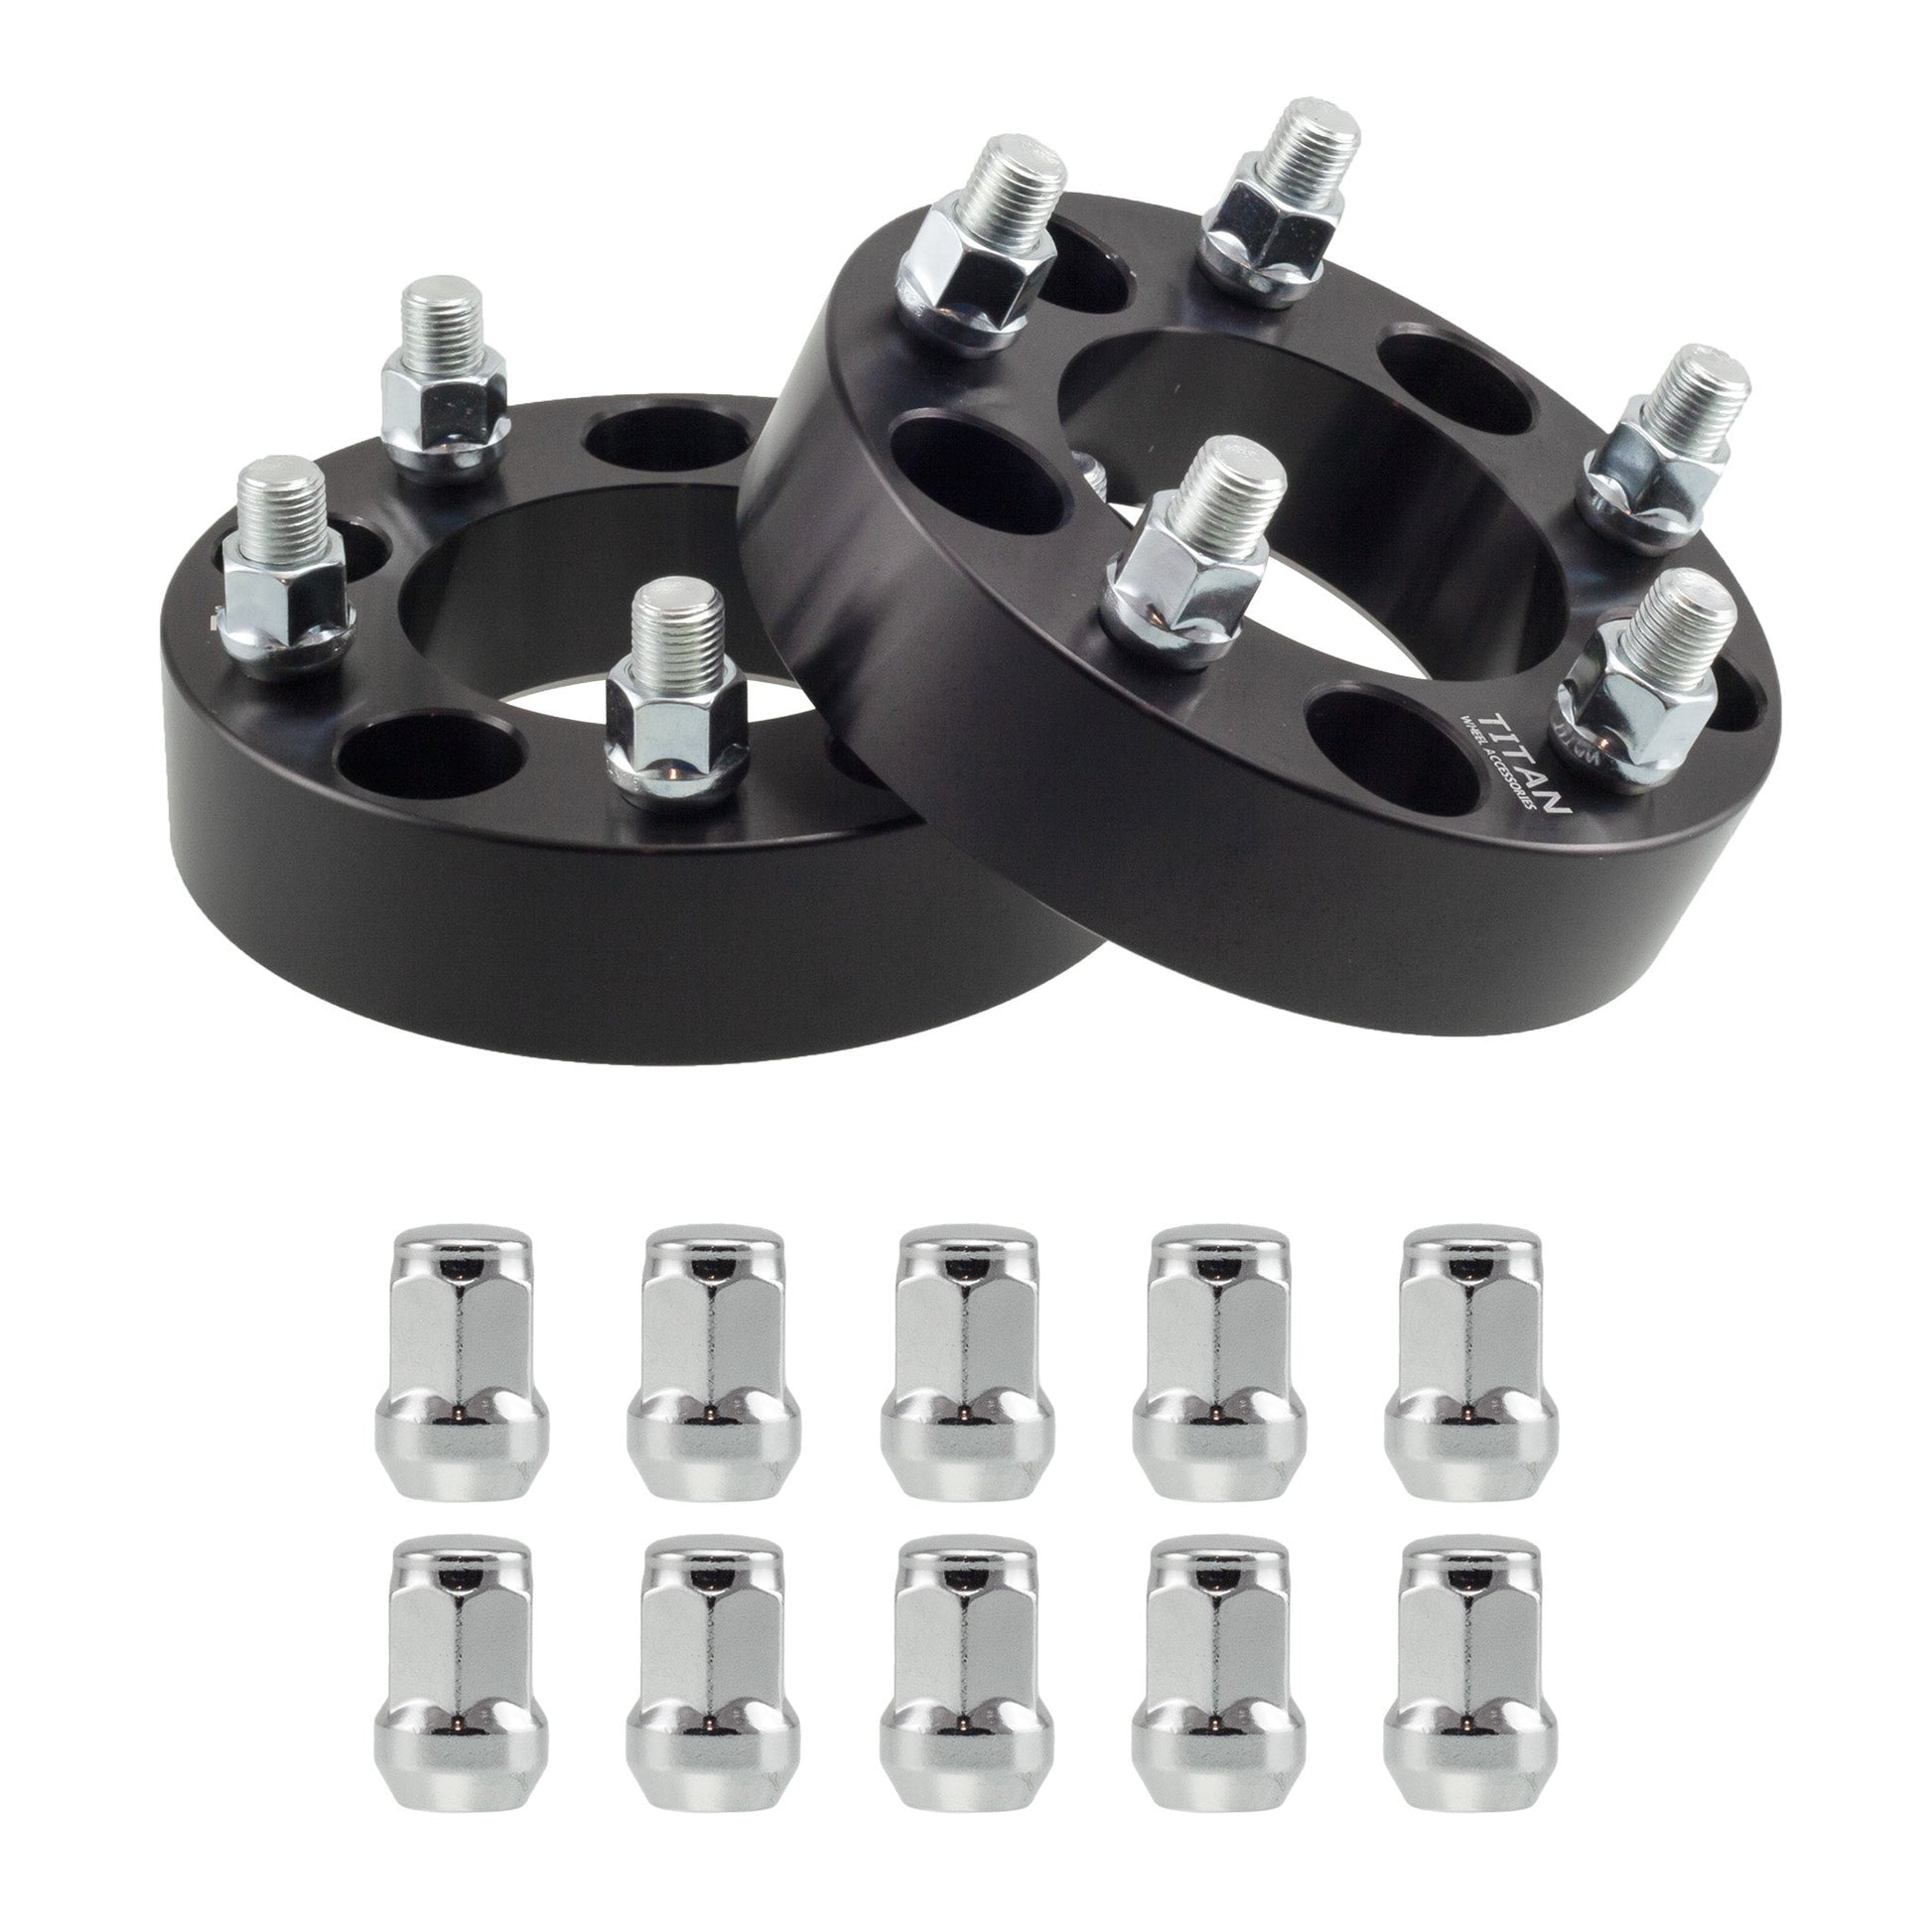 32mm (1.25") Titan Wheel Spacers for Chevy Buick Cadillac Oldsmobile | 5x114.3 (5x4.5) | 12x1.5 Studs | Titan Wheel Accessories